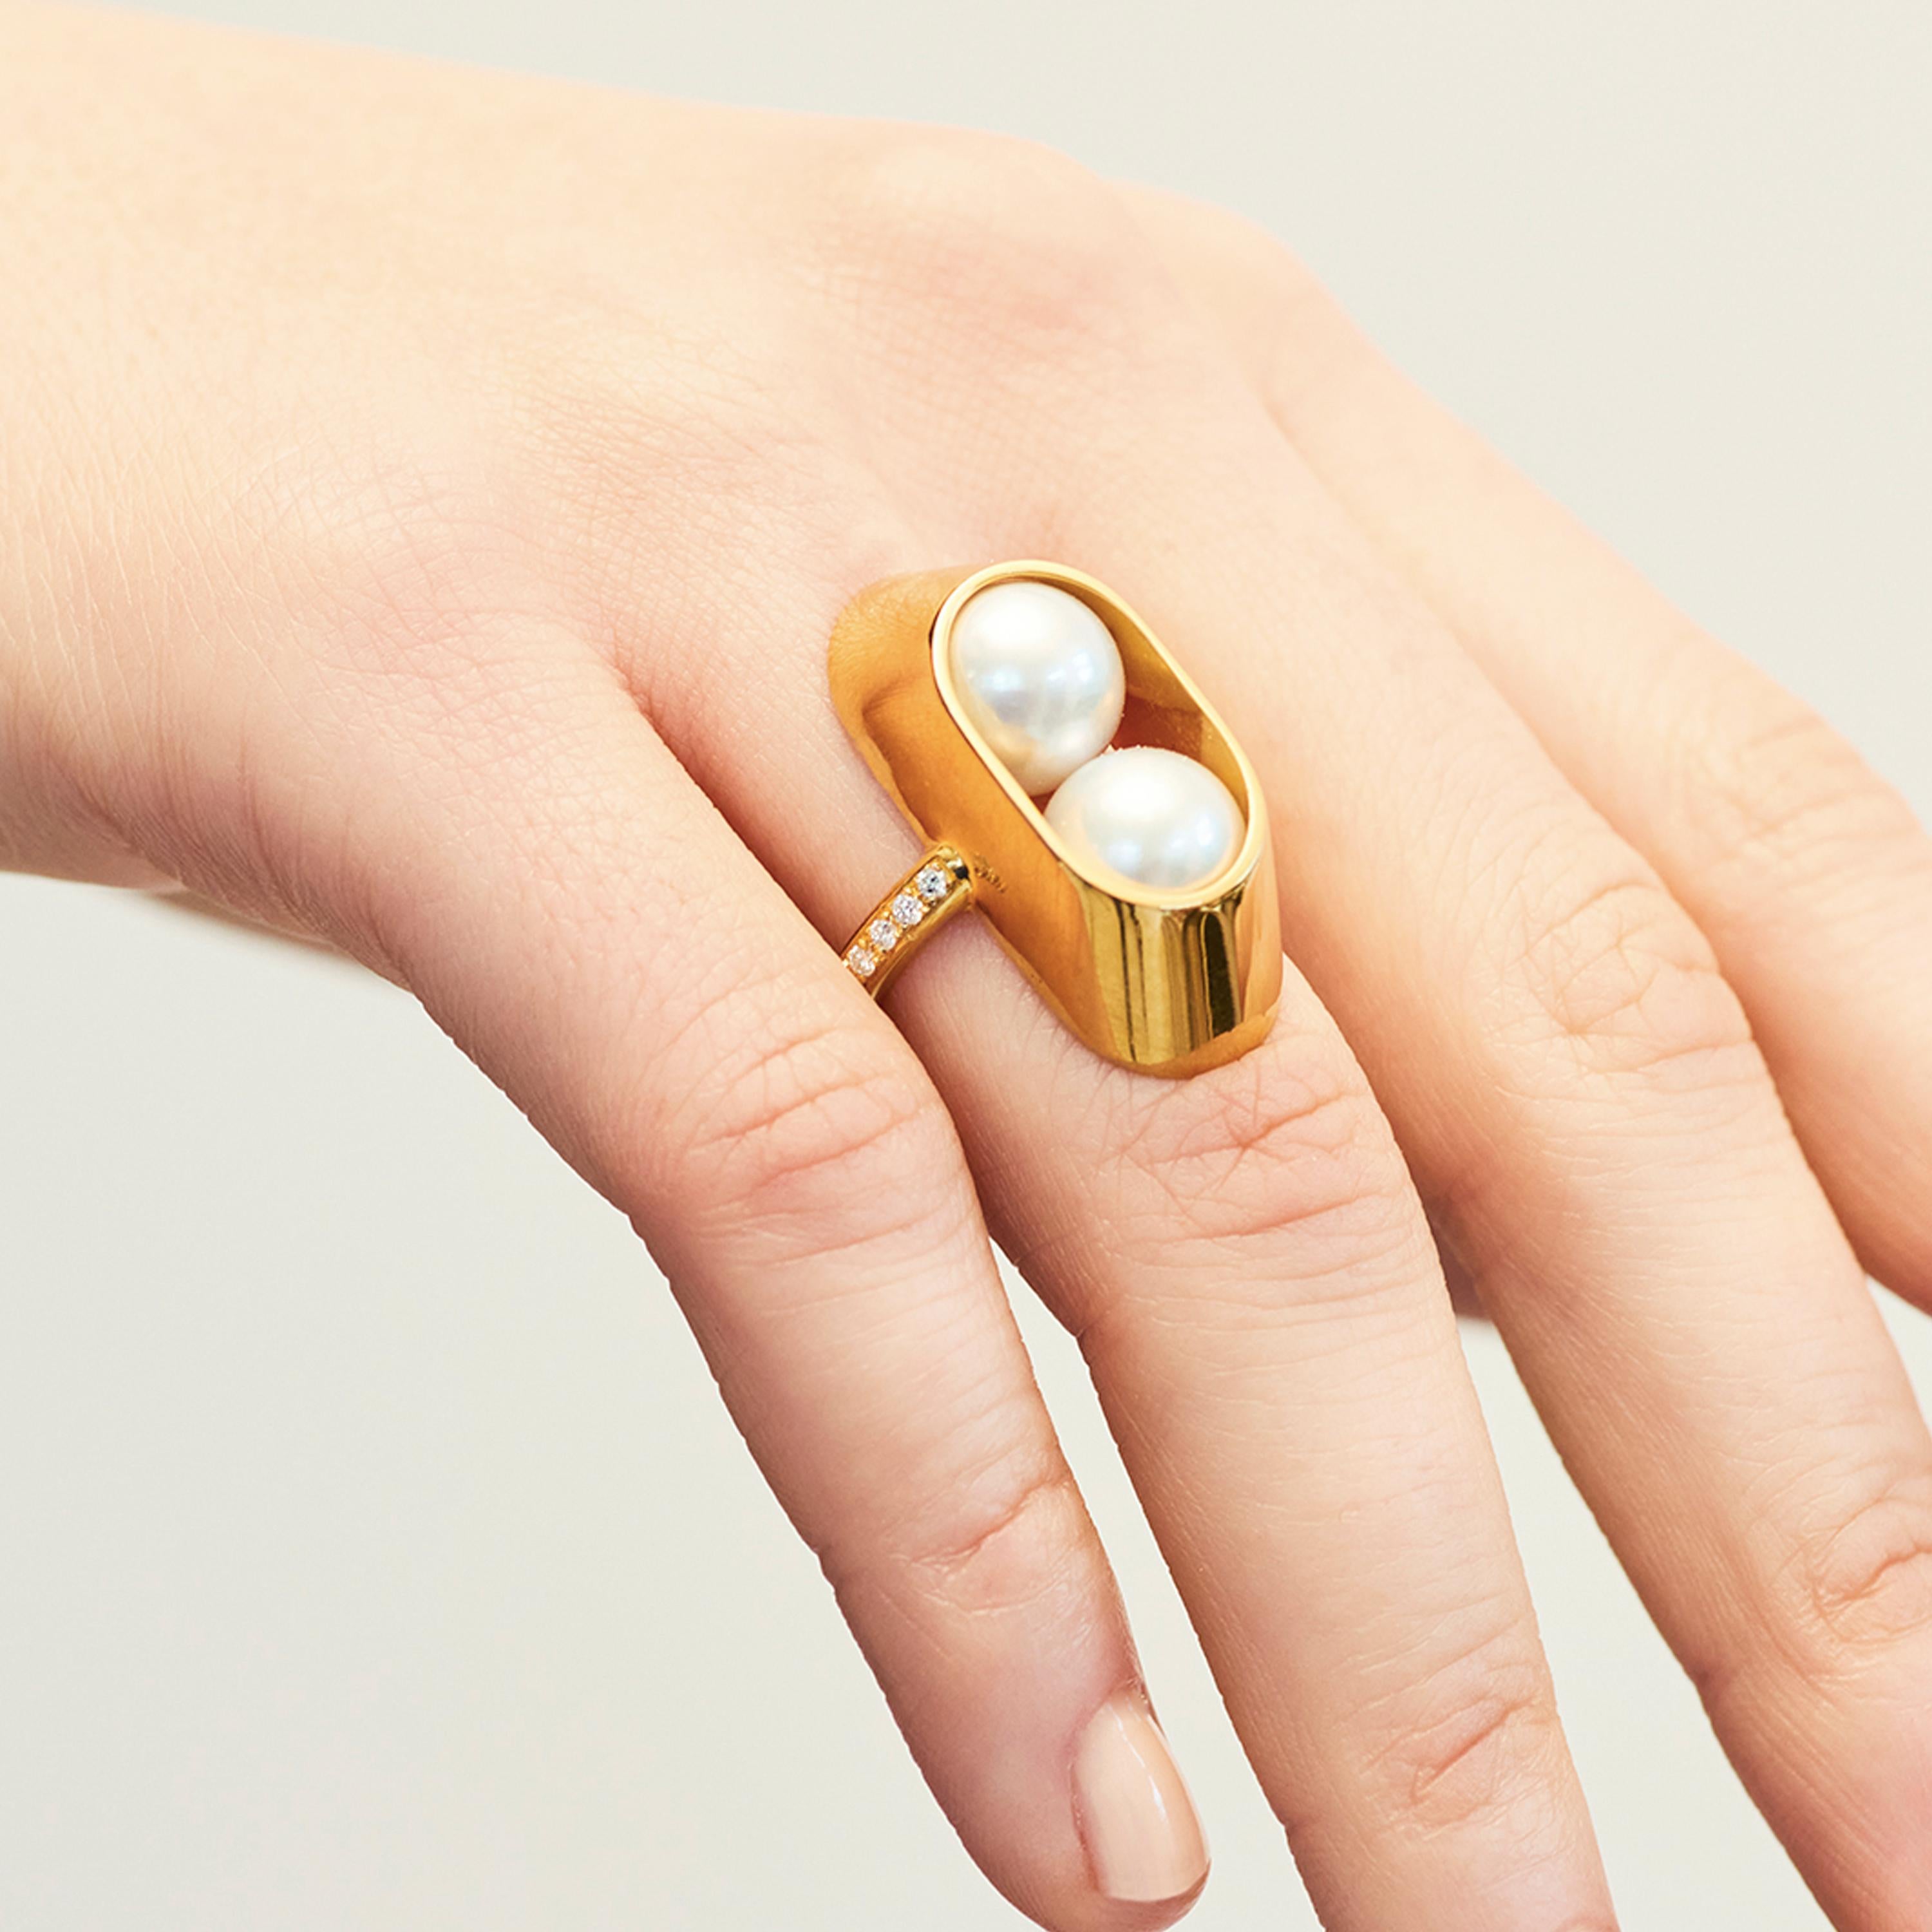 Nestled within angled 18 karat gold walls, two 10mm South Sea pearls sit boldly atop Yael Sonia's statement ring. Pave diamonds add sophistication to this piece from the Ellipse Collection.

Yael Sonia’s custom cut stones come to life in her modern